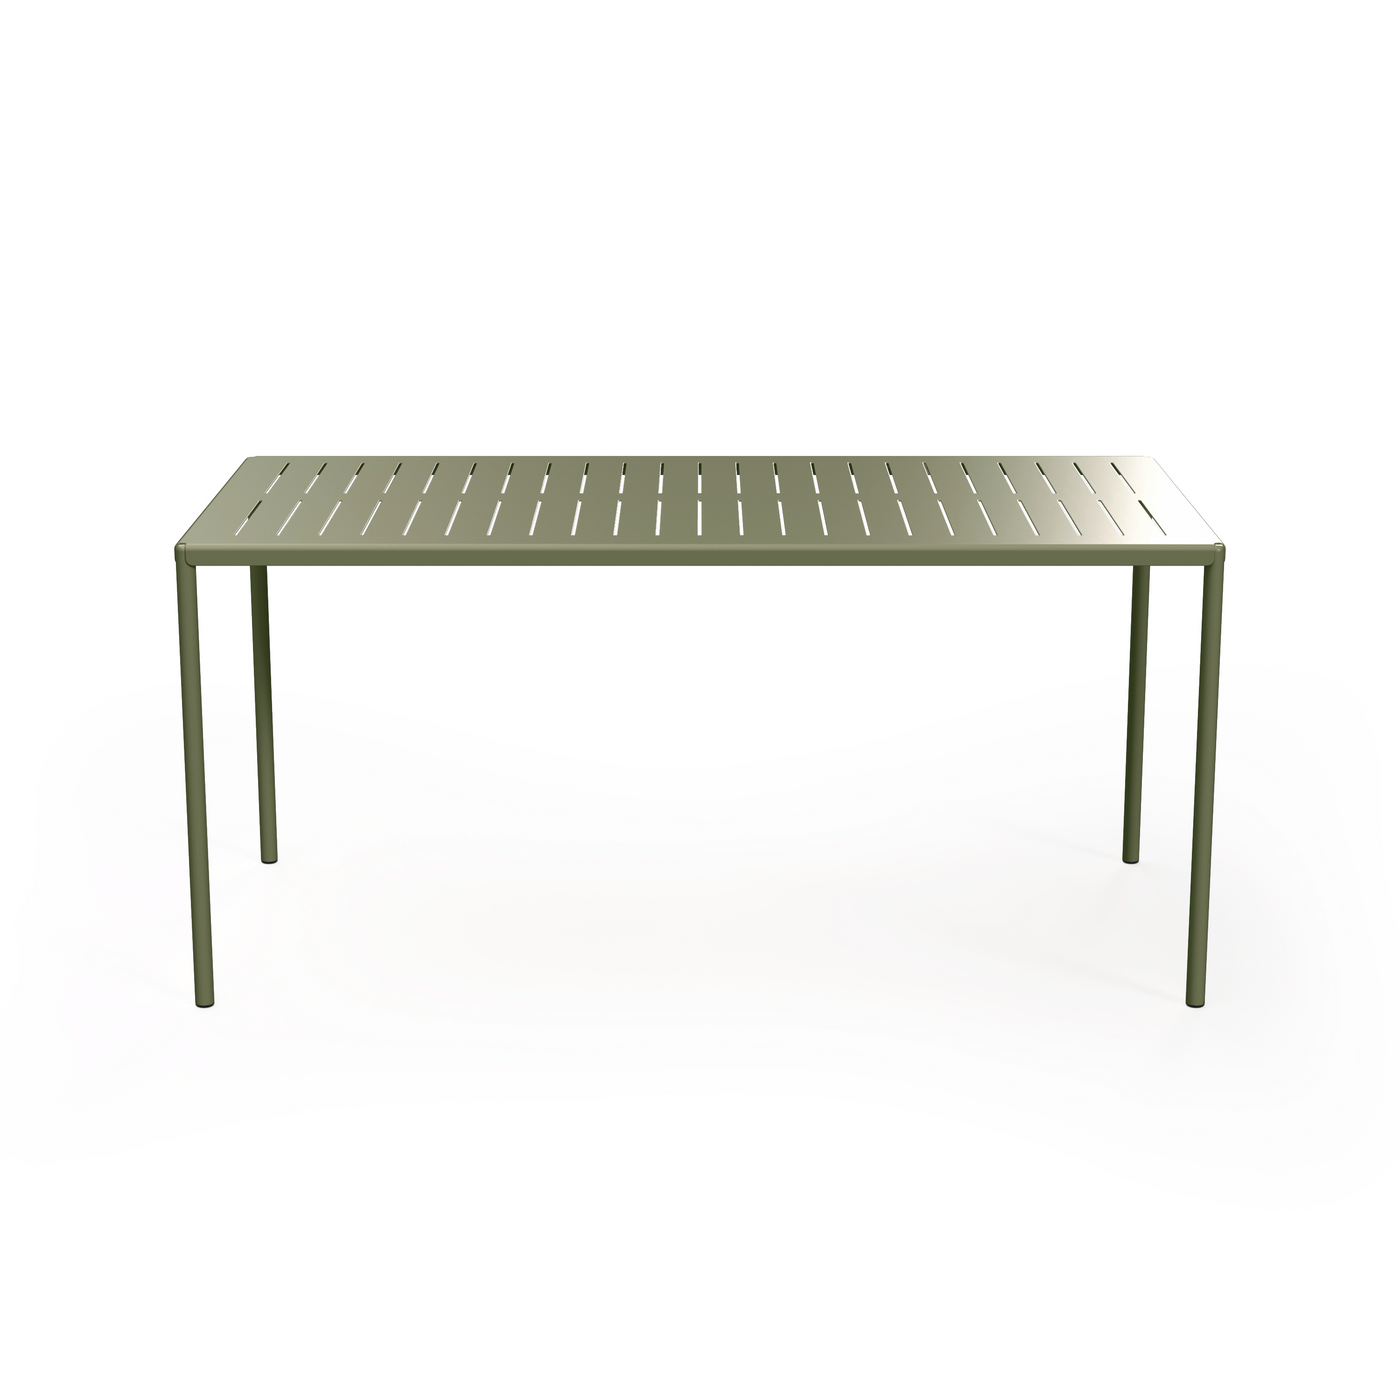 Frame Metal Garden Table, 6 Seater, Olive Green